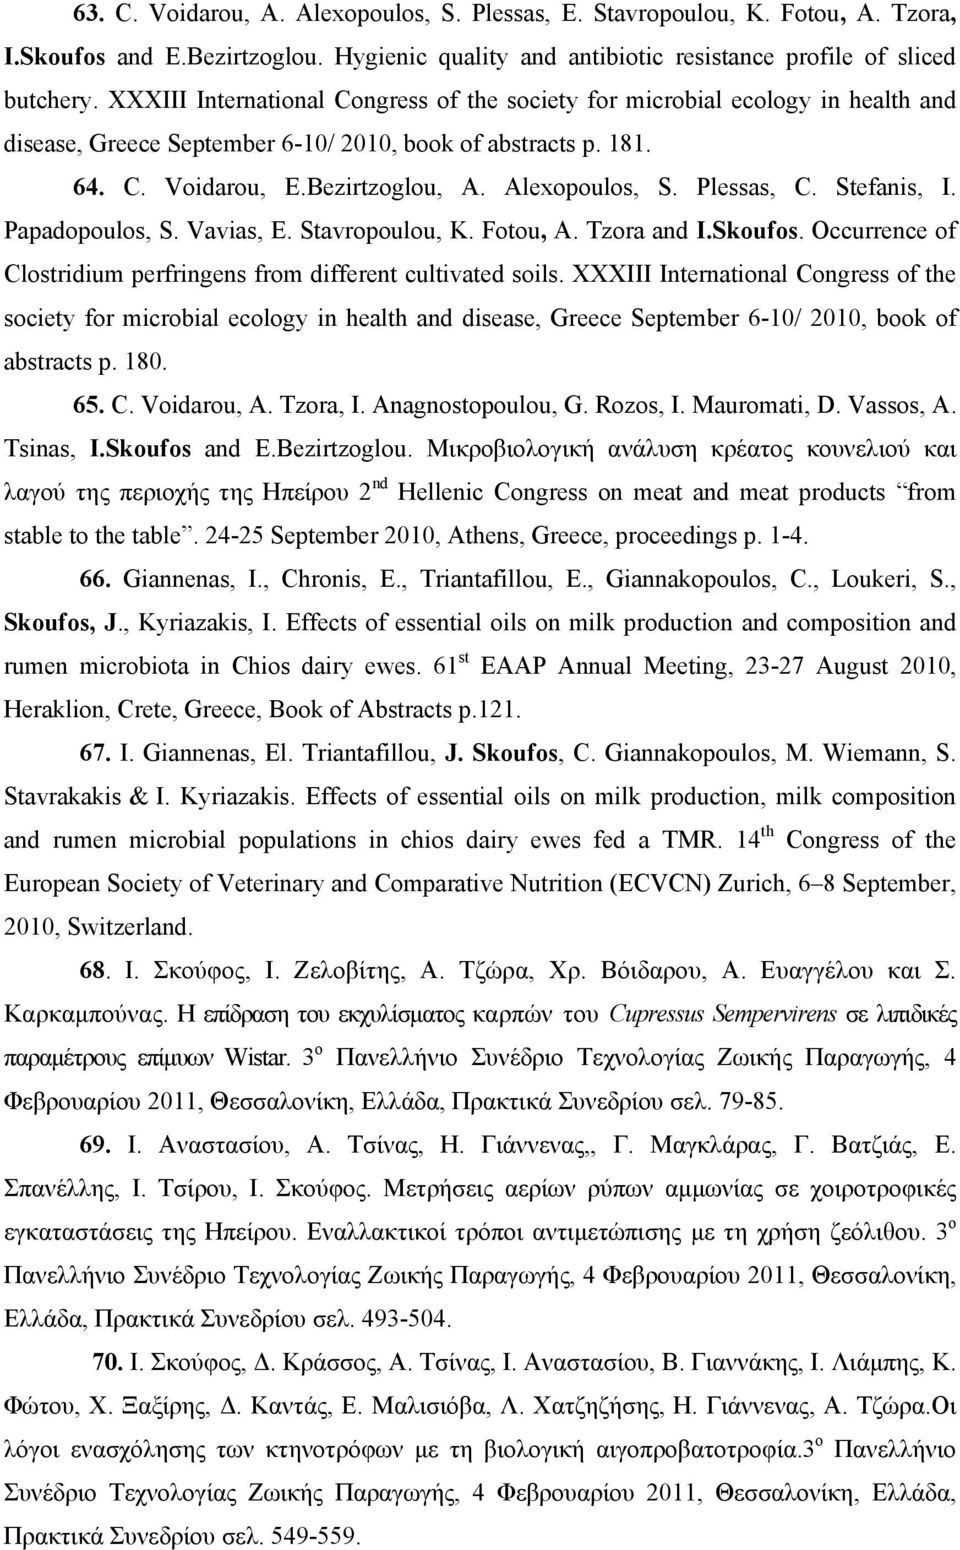 Plessas, C. Stefanis, I. Papadopoulos, S. Vavias, E. Stavropoulou, K. Fotou, A. Tzora and I.Skoufos. Occurrence of Clostridium perfringens from different cultivated soils.